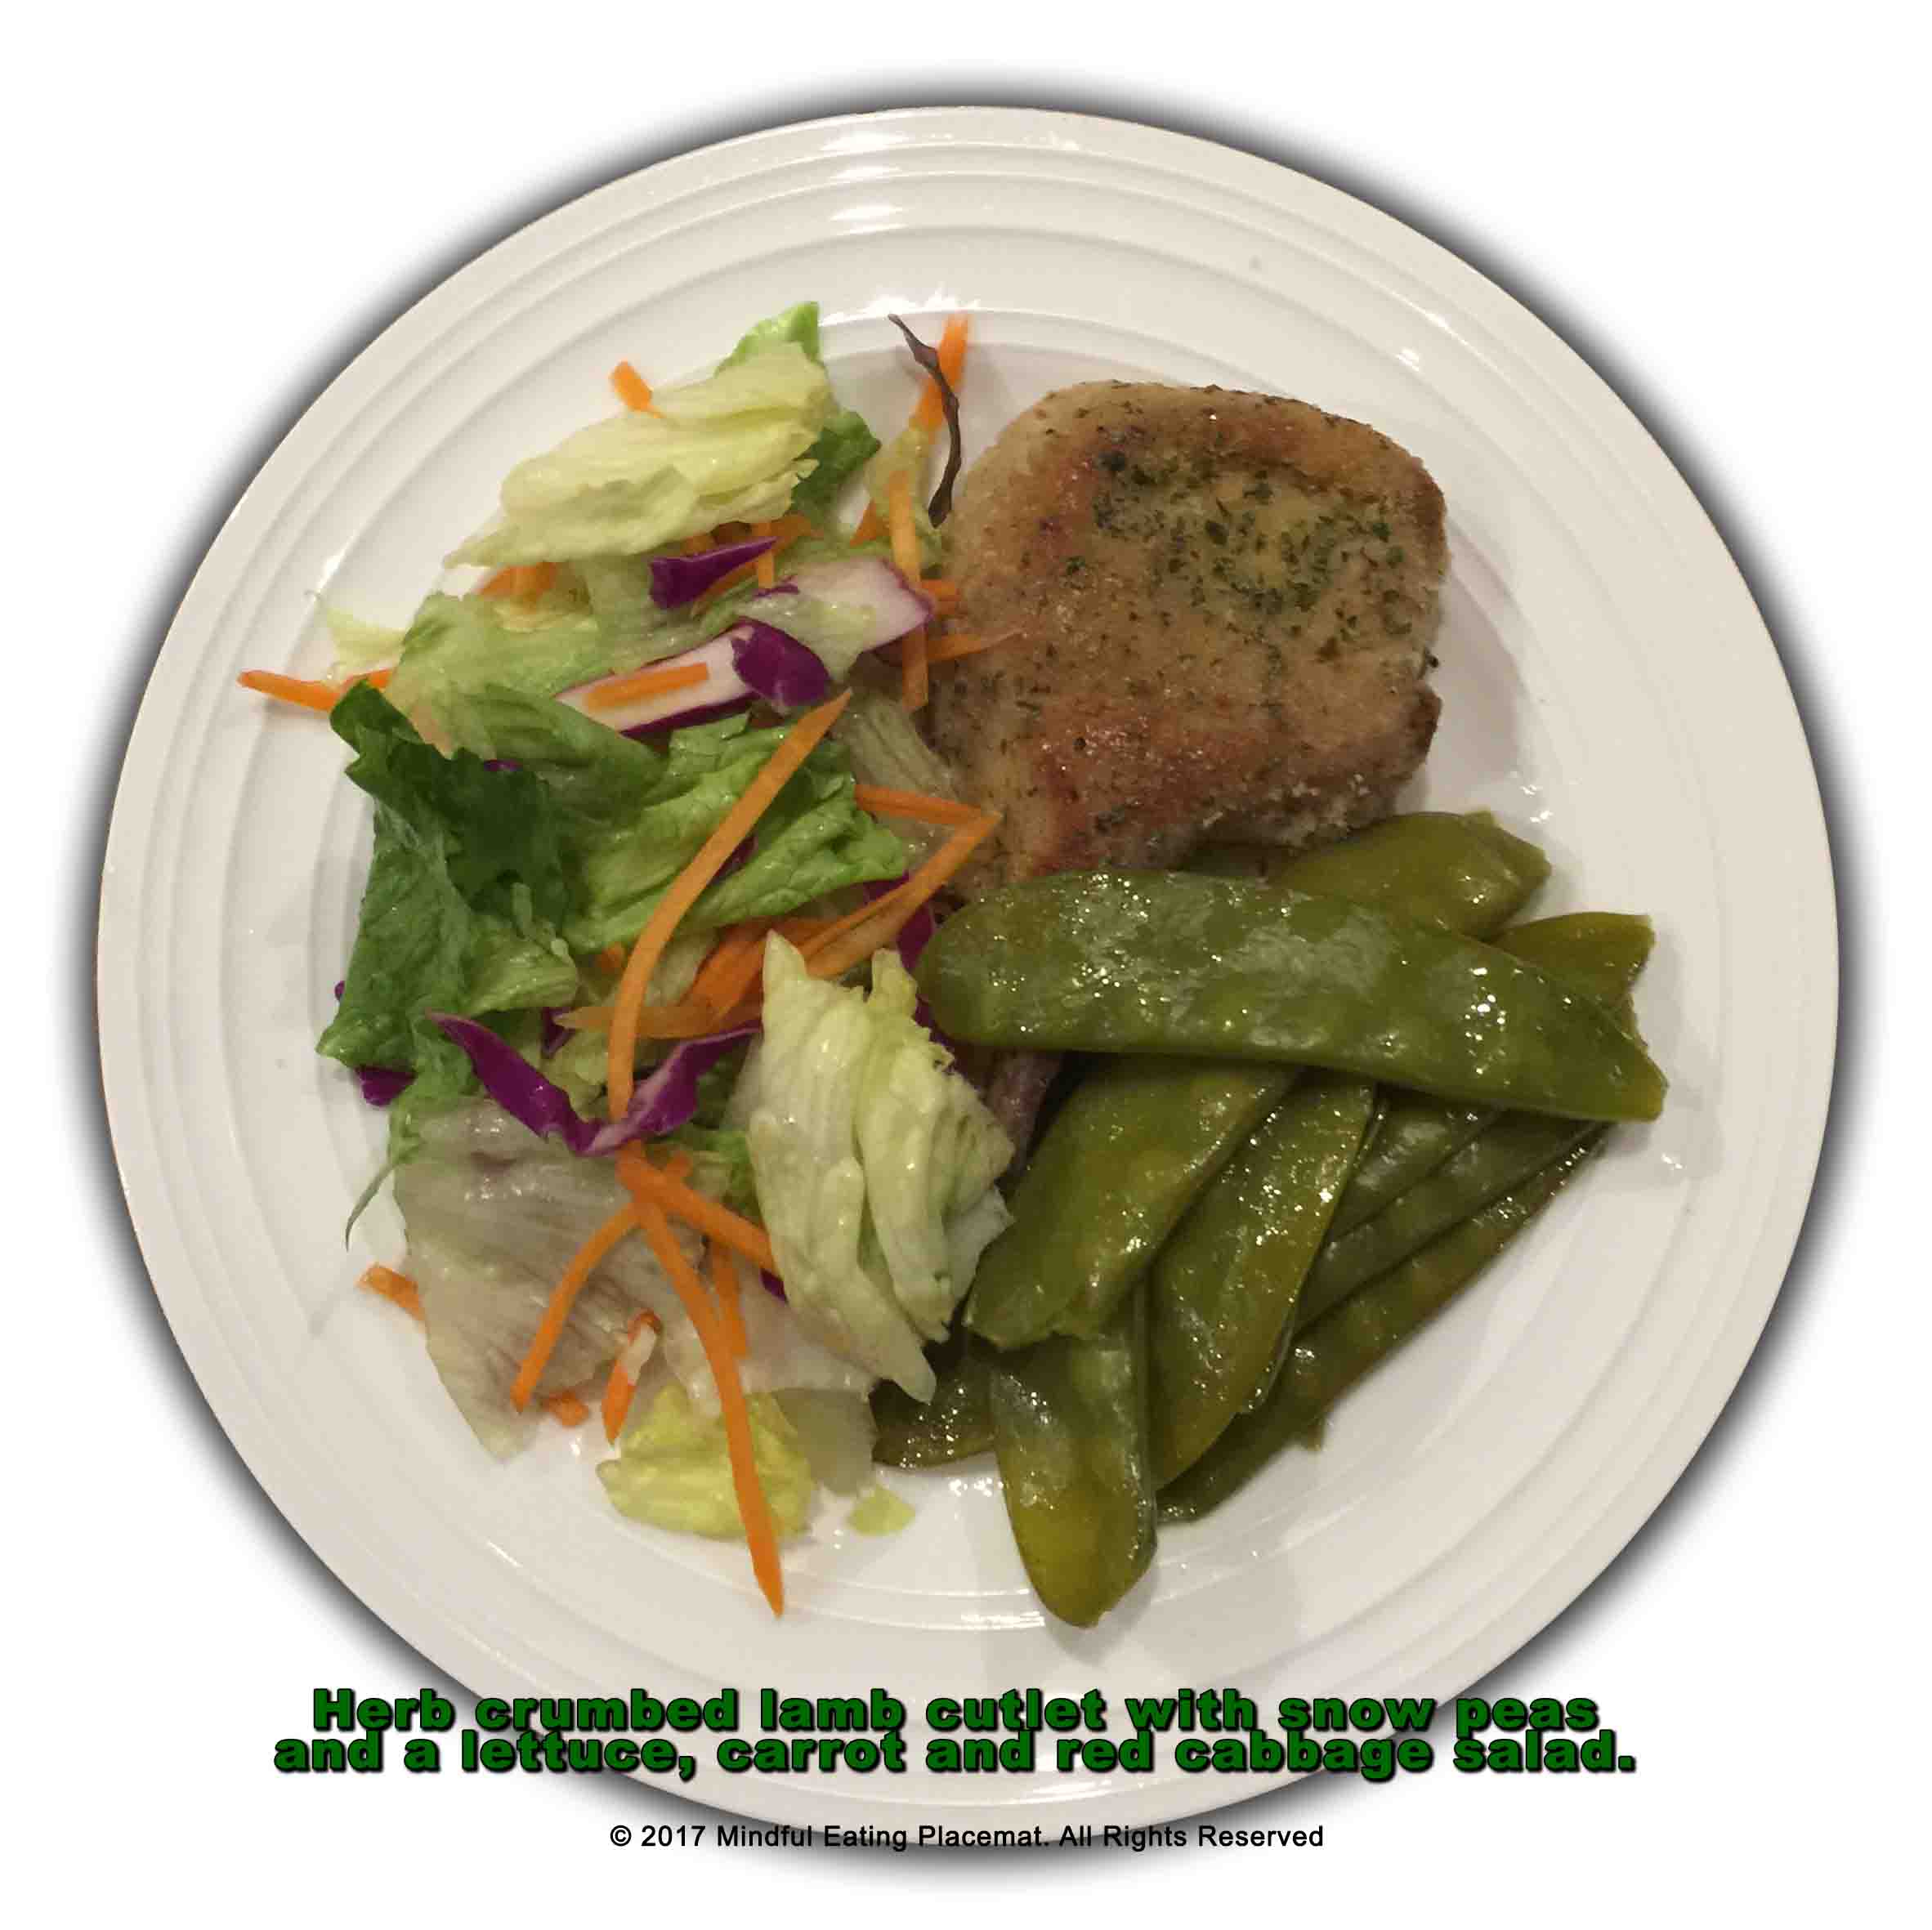 Lamb cutlet with snowpeas and salad